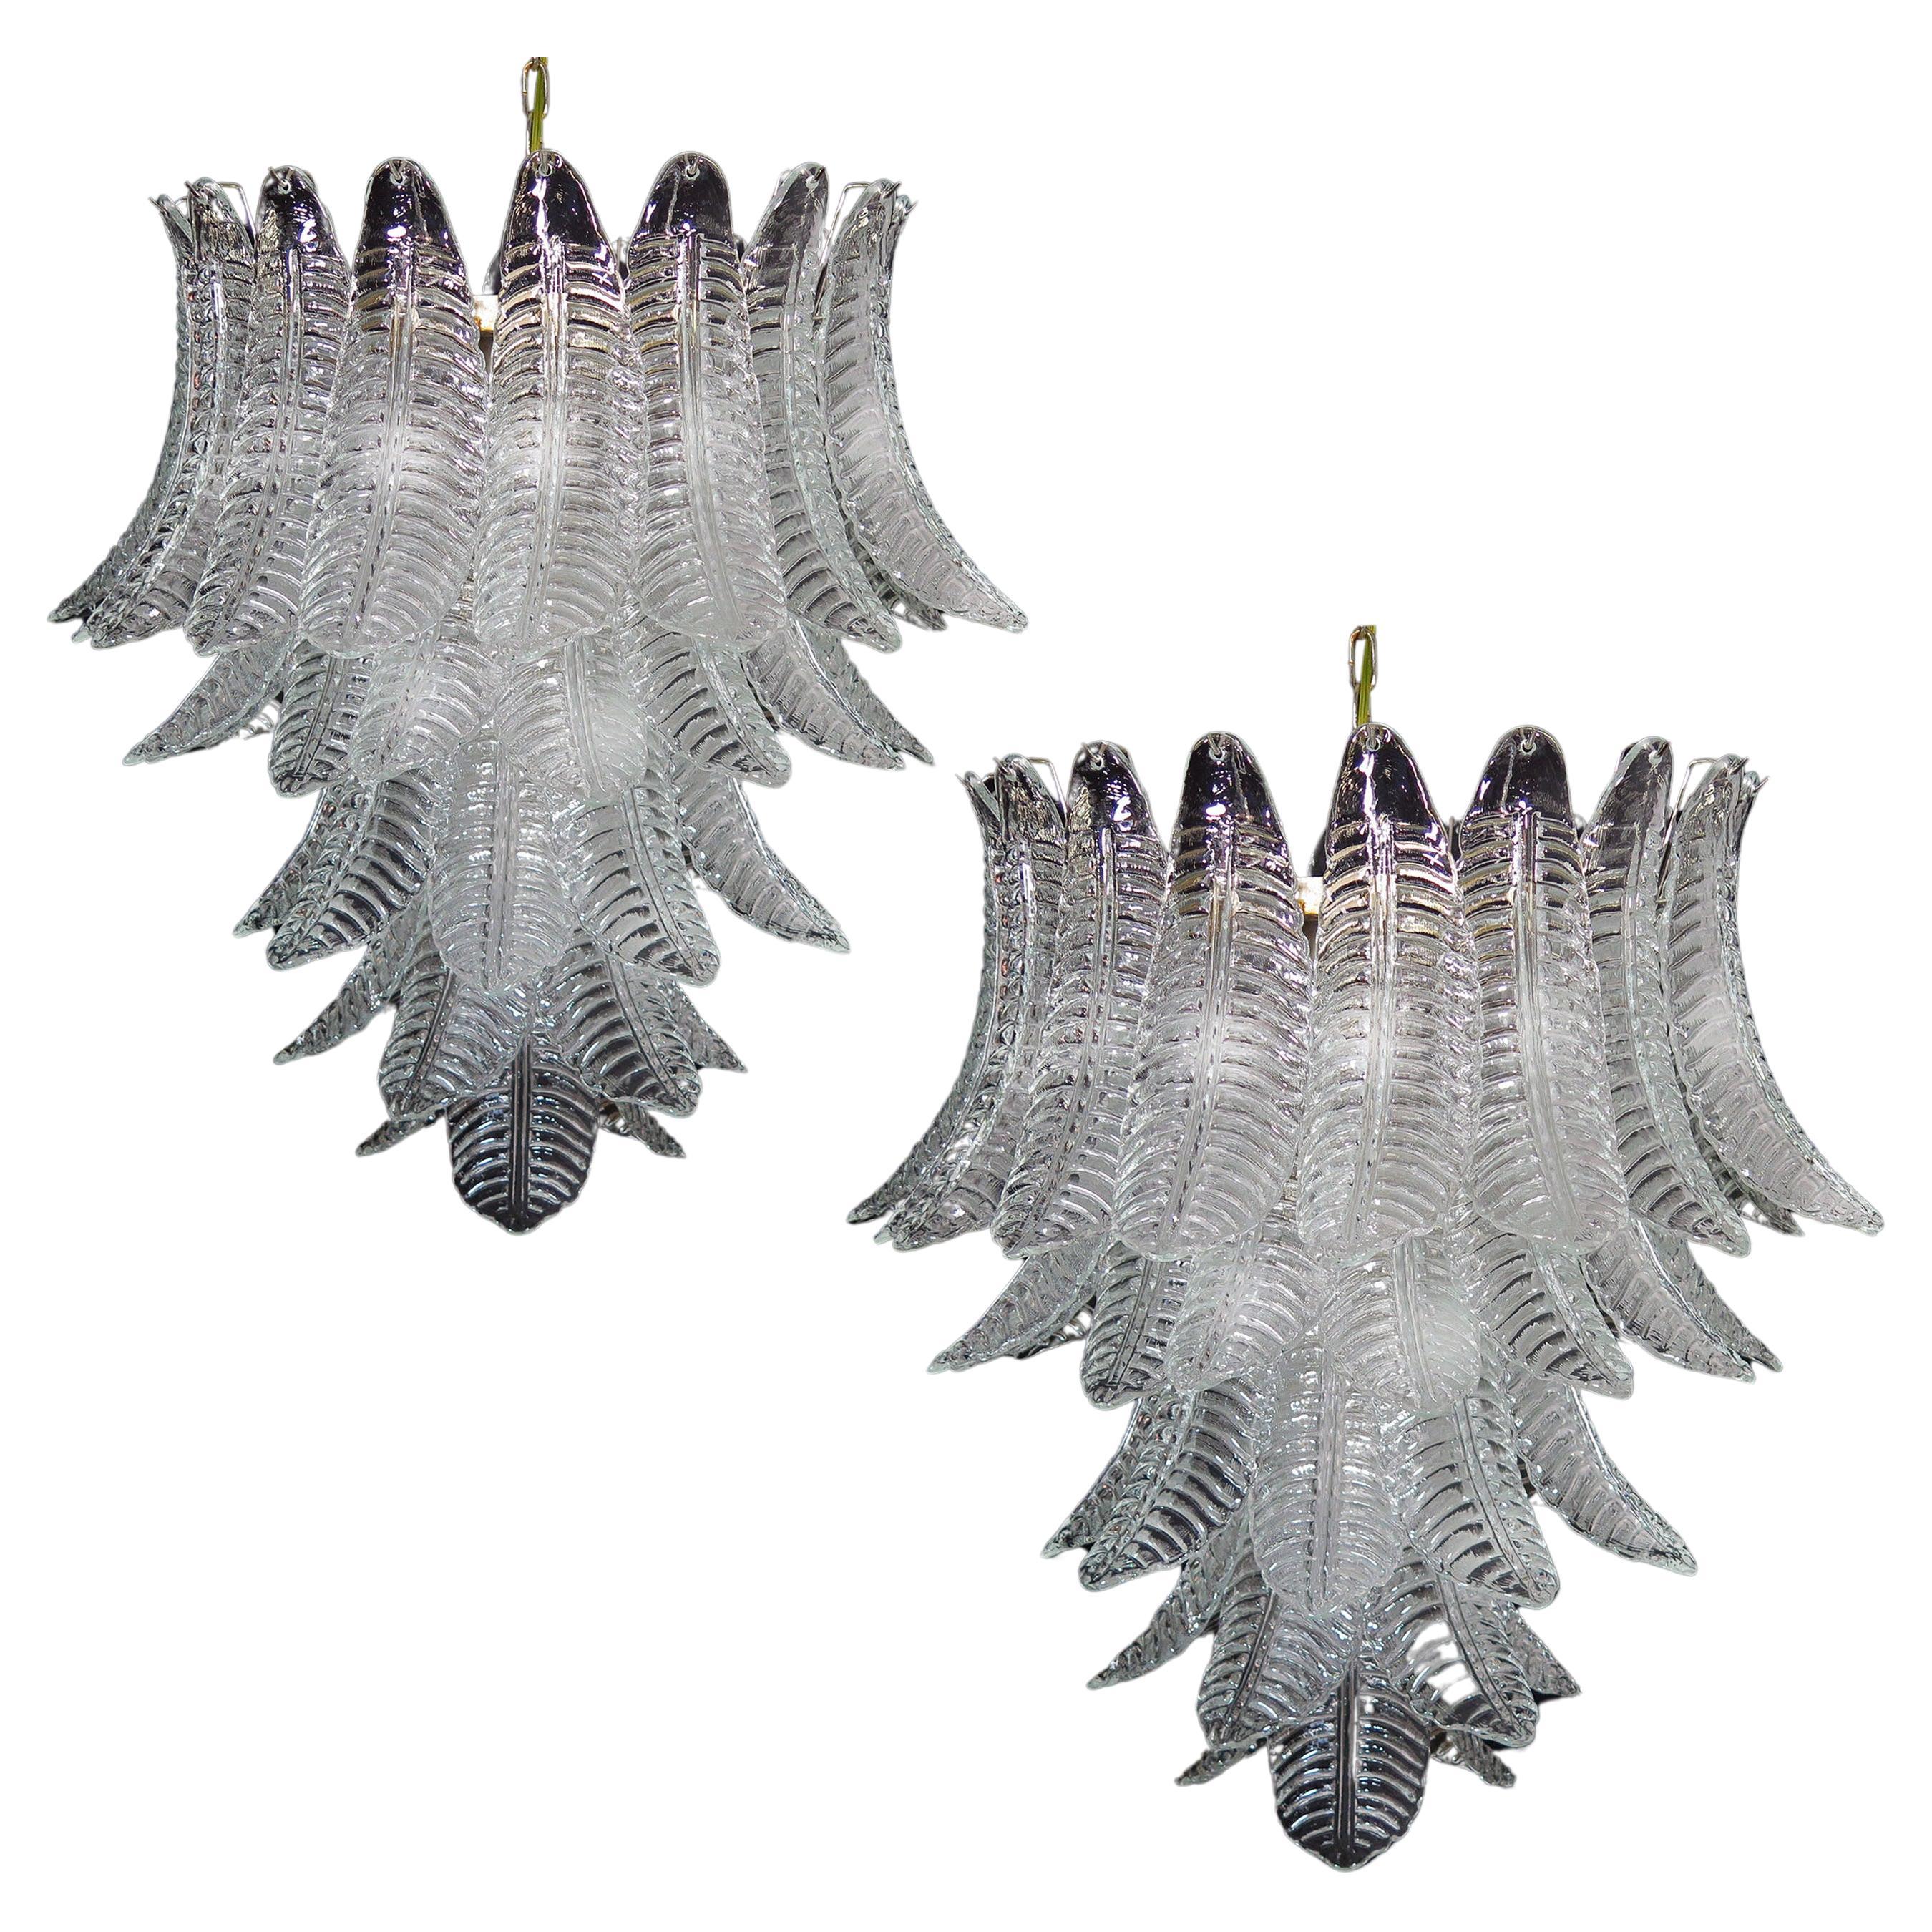 Pair of beautiful and huge Italian Murano chandeliers each composed of 52 splendid transparent glasses that give a very elegant look. The glasses of this chandelier are real works of art, the weight of this chandelier is 45 kg.

Dimensions: 61